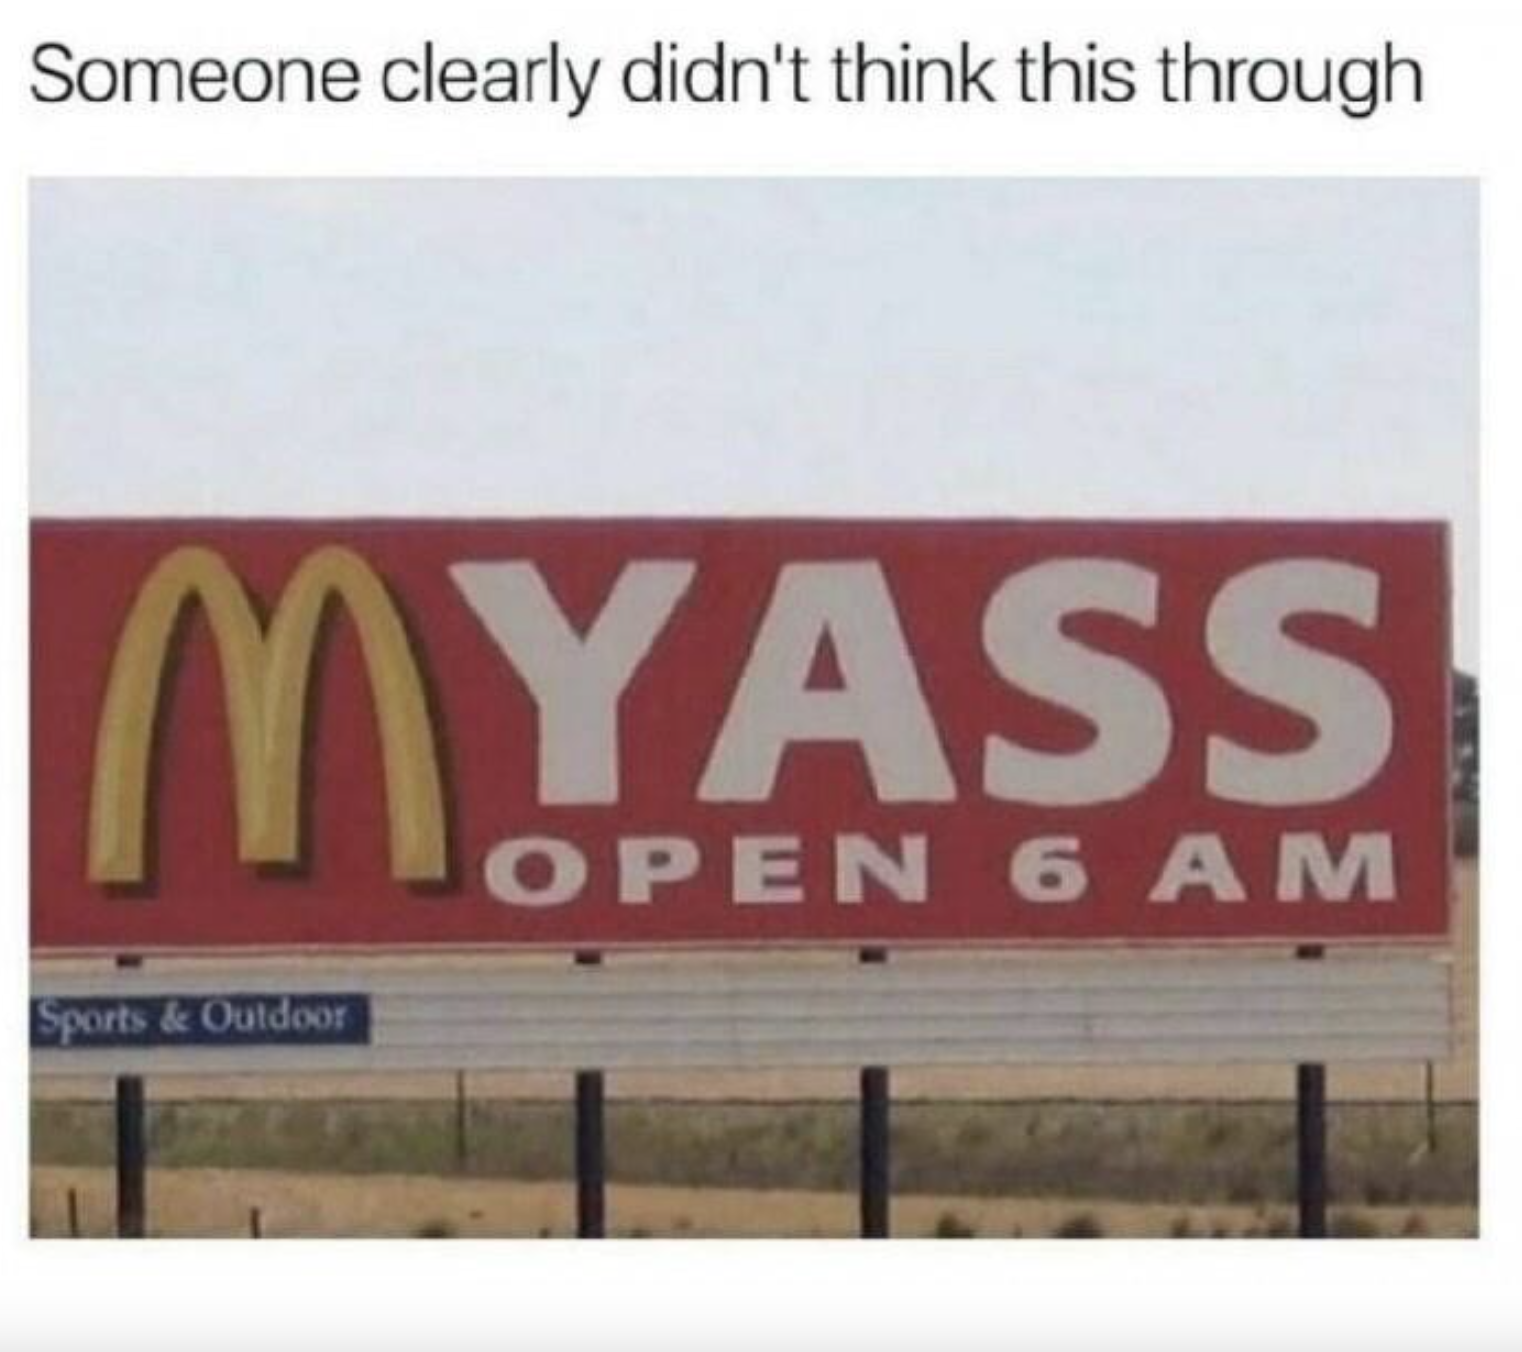 &quot;Myass open 6 am&quot; that&#x27;s supposed to look like the McDonald&#x27;s M and &quot;YASS open 6 am